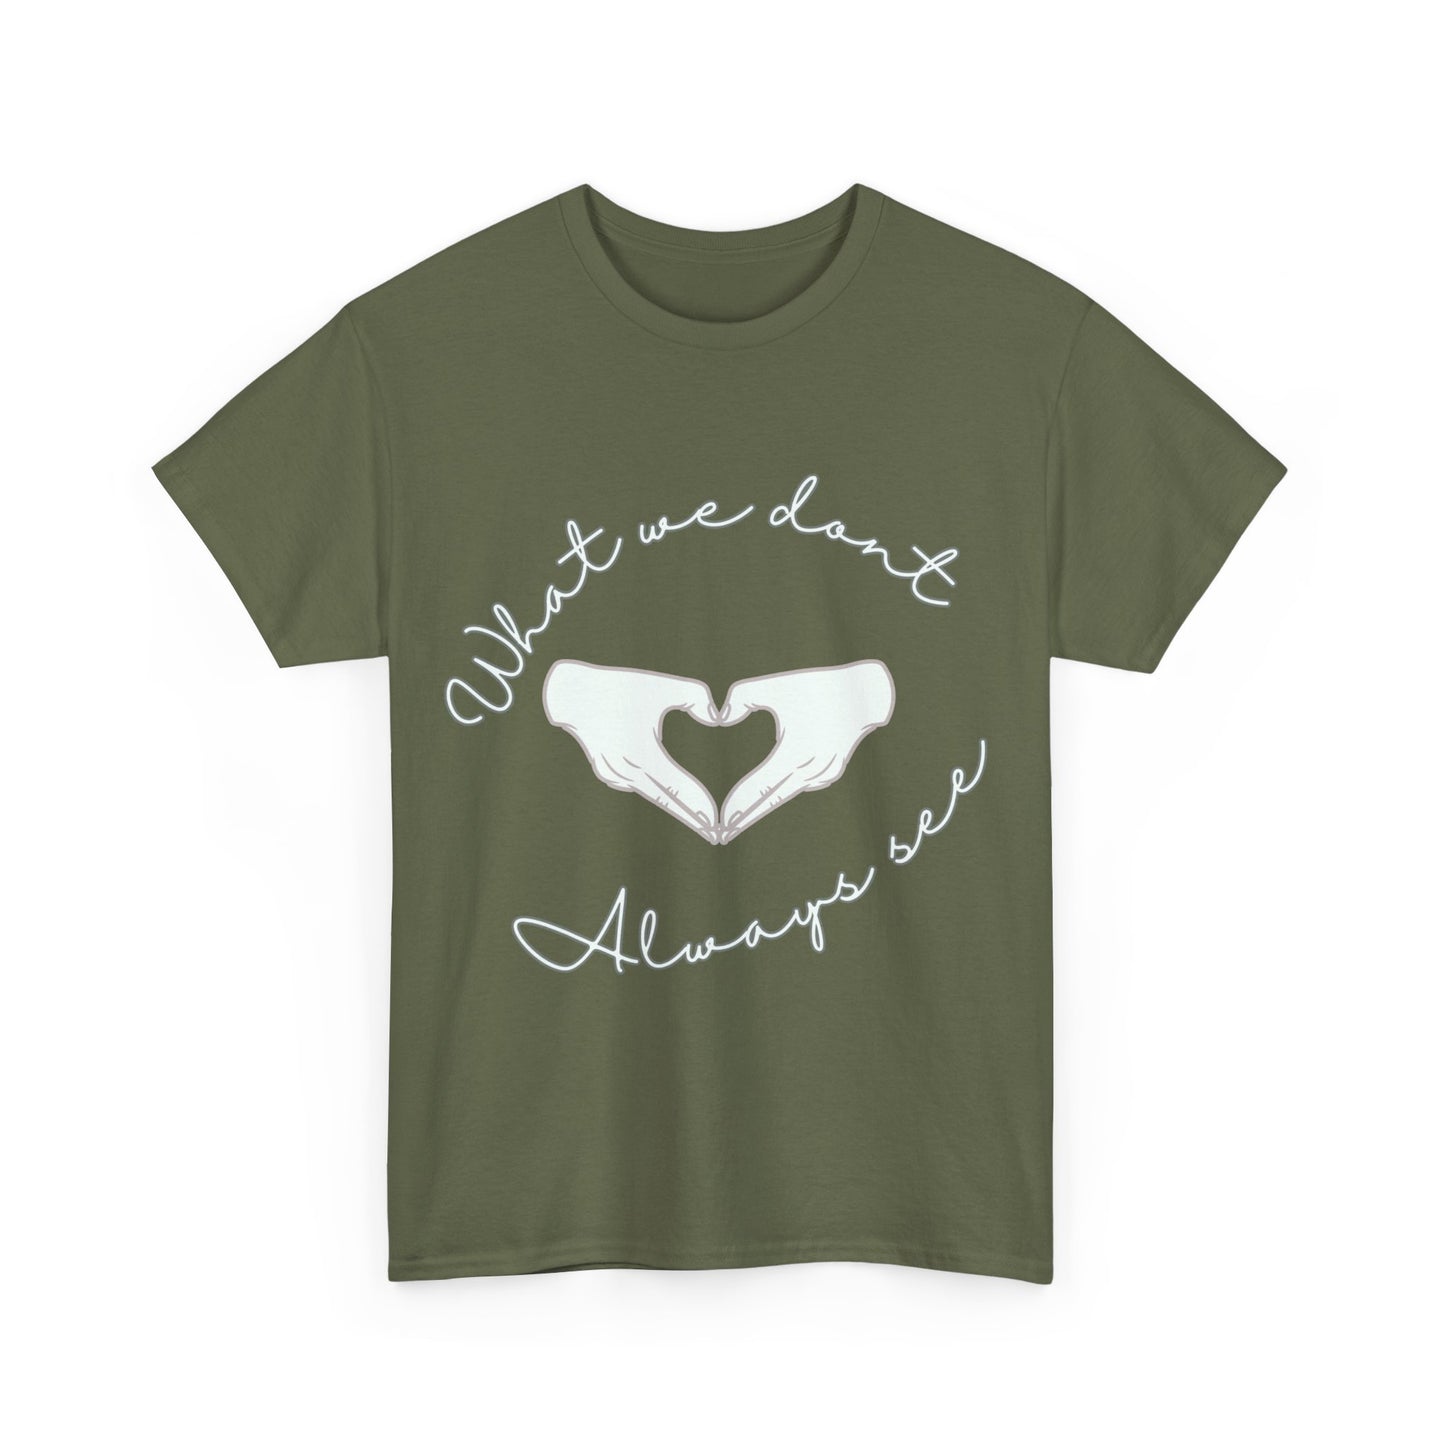 "What We Don't Always See" Heart Hands Tee